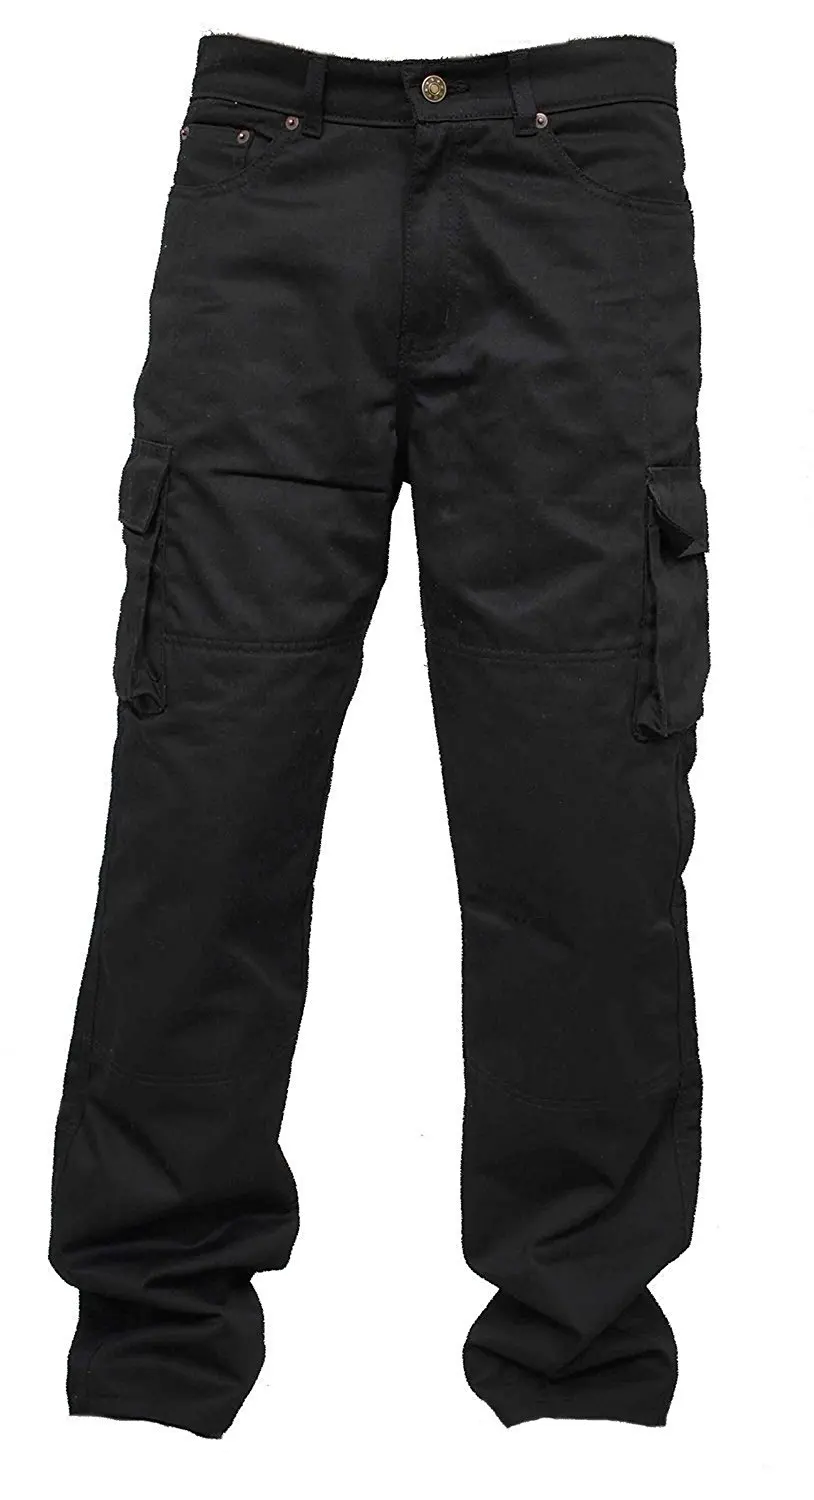 Buy Newfacelook New Mens Cargo Trousers Combat Military Jeans Work Wear ...